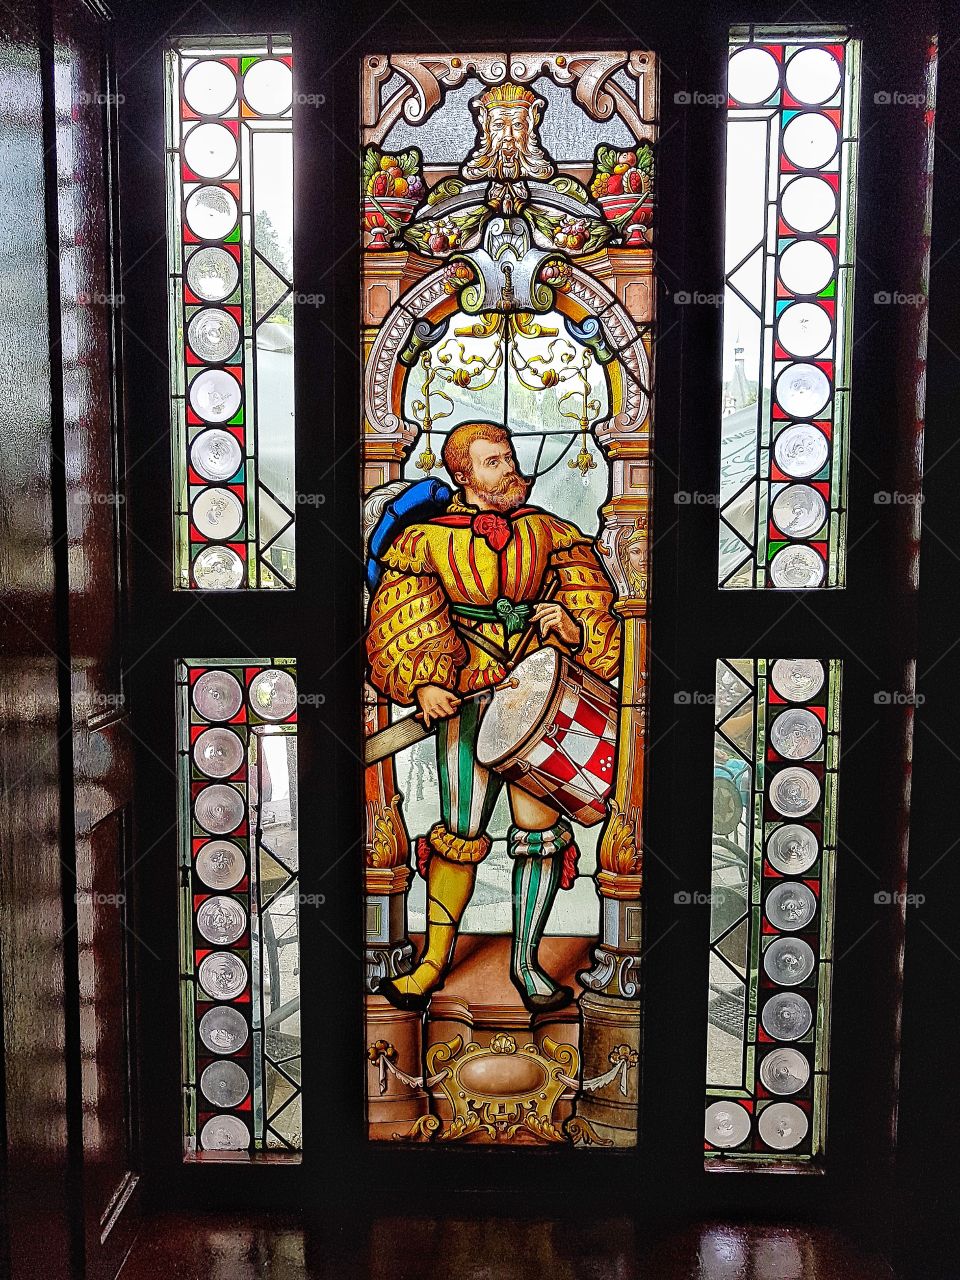 Stained glass in Sinaia